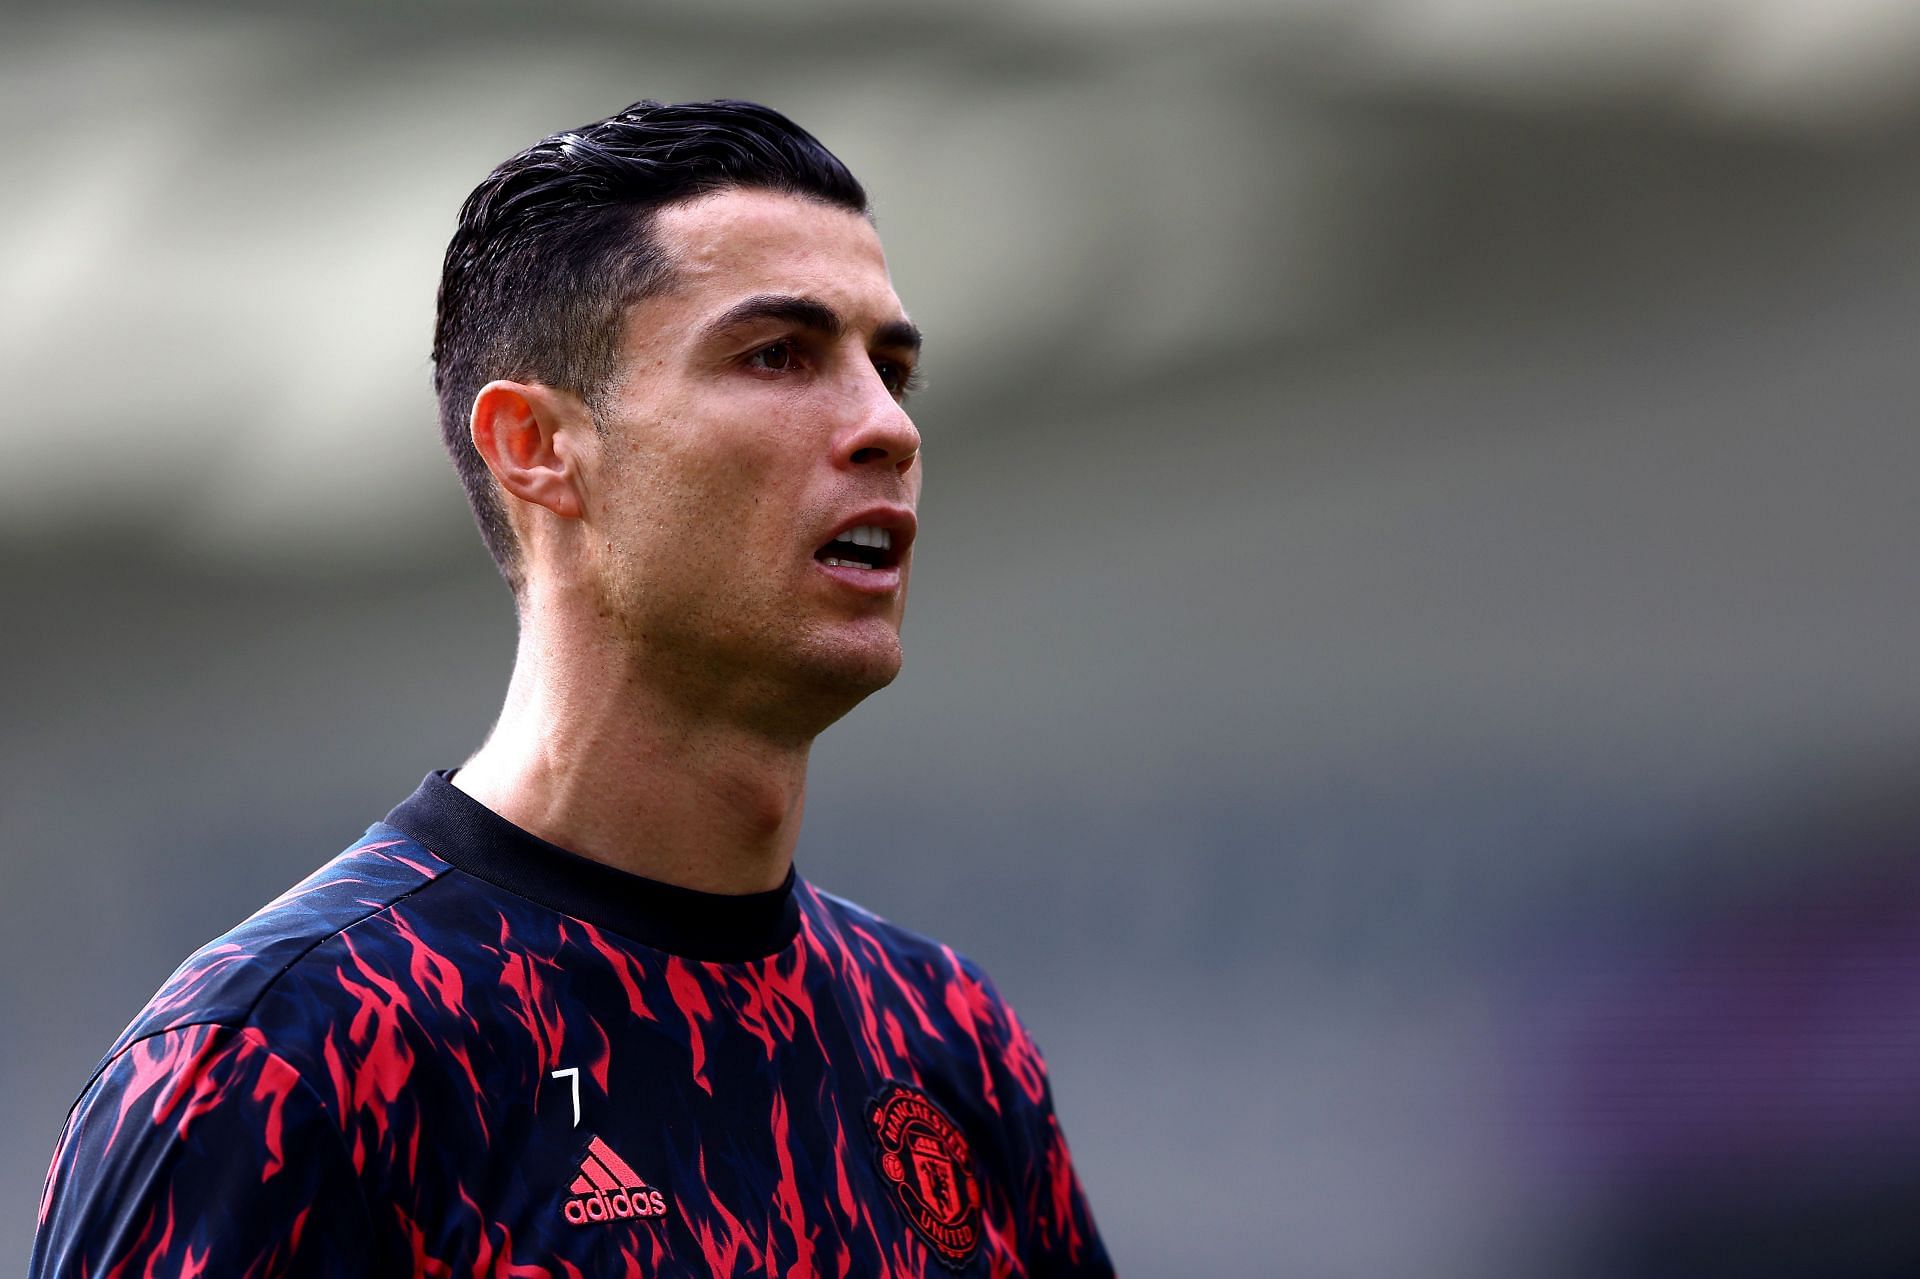 Cristiano Ronaldo has hinted that he could stay at Old Trafford next summer.